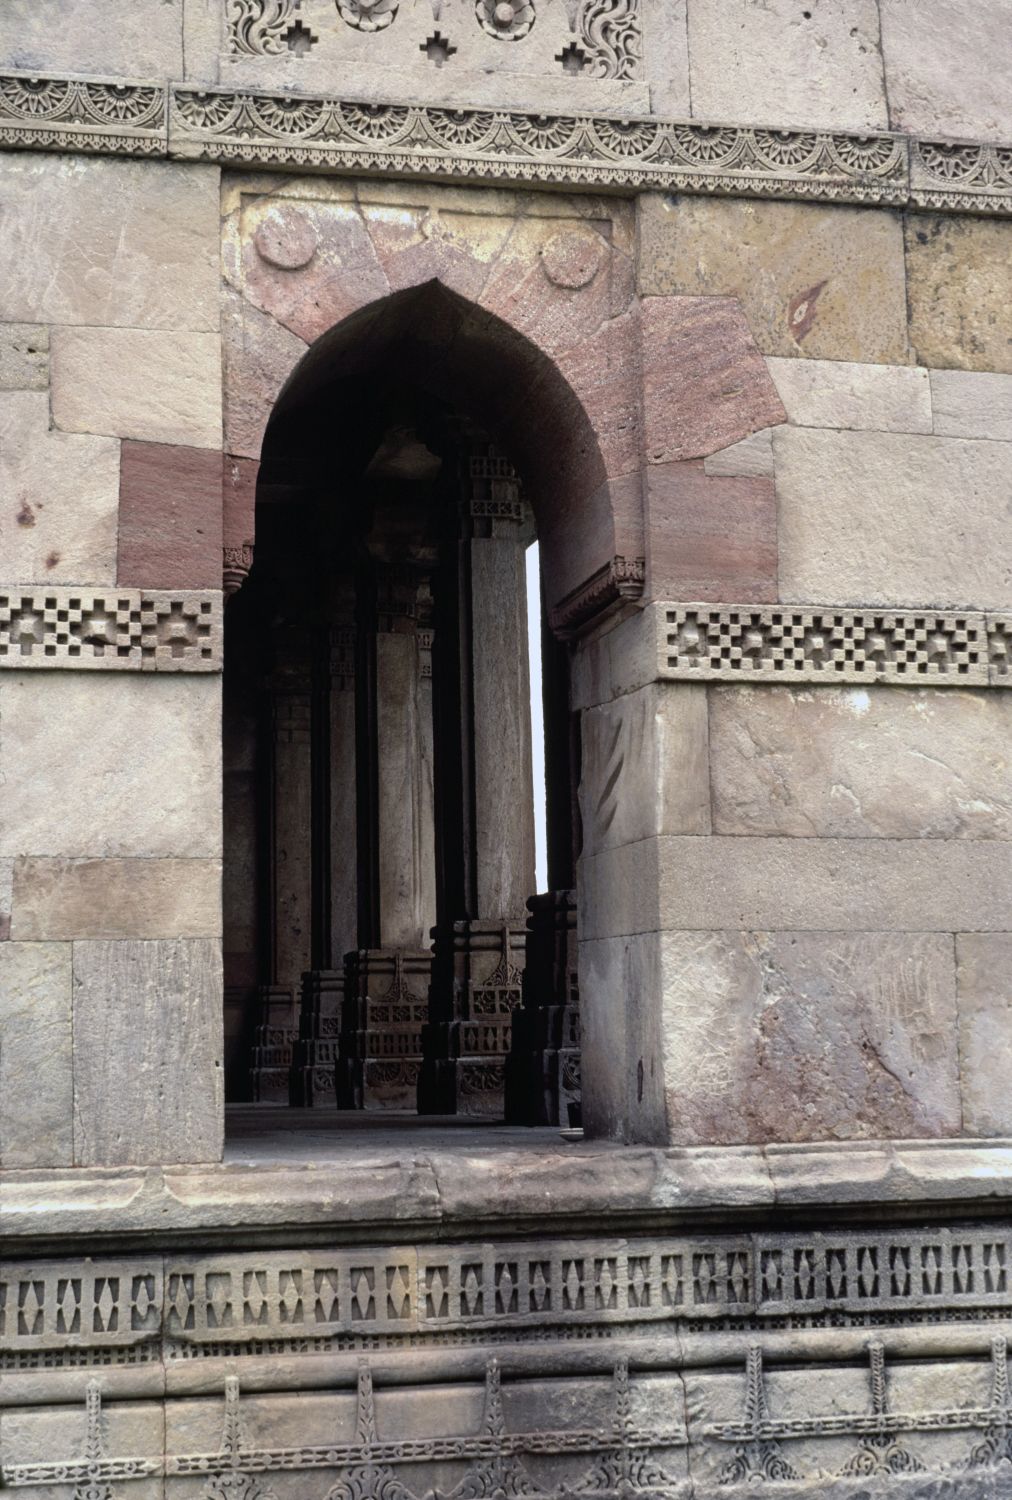 Exterior view of south wall showing arched doorway.